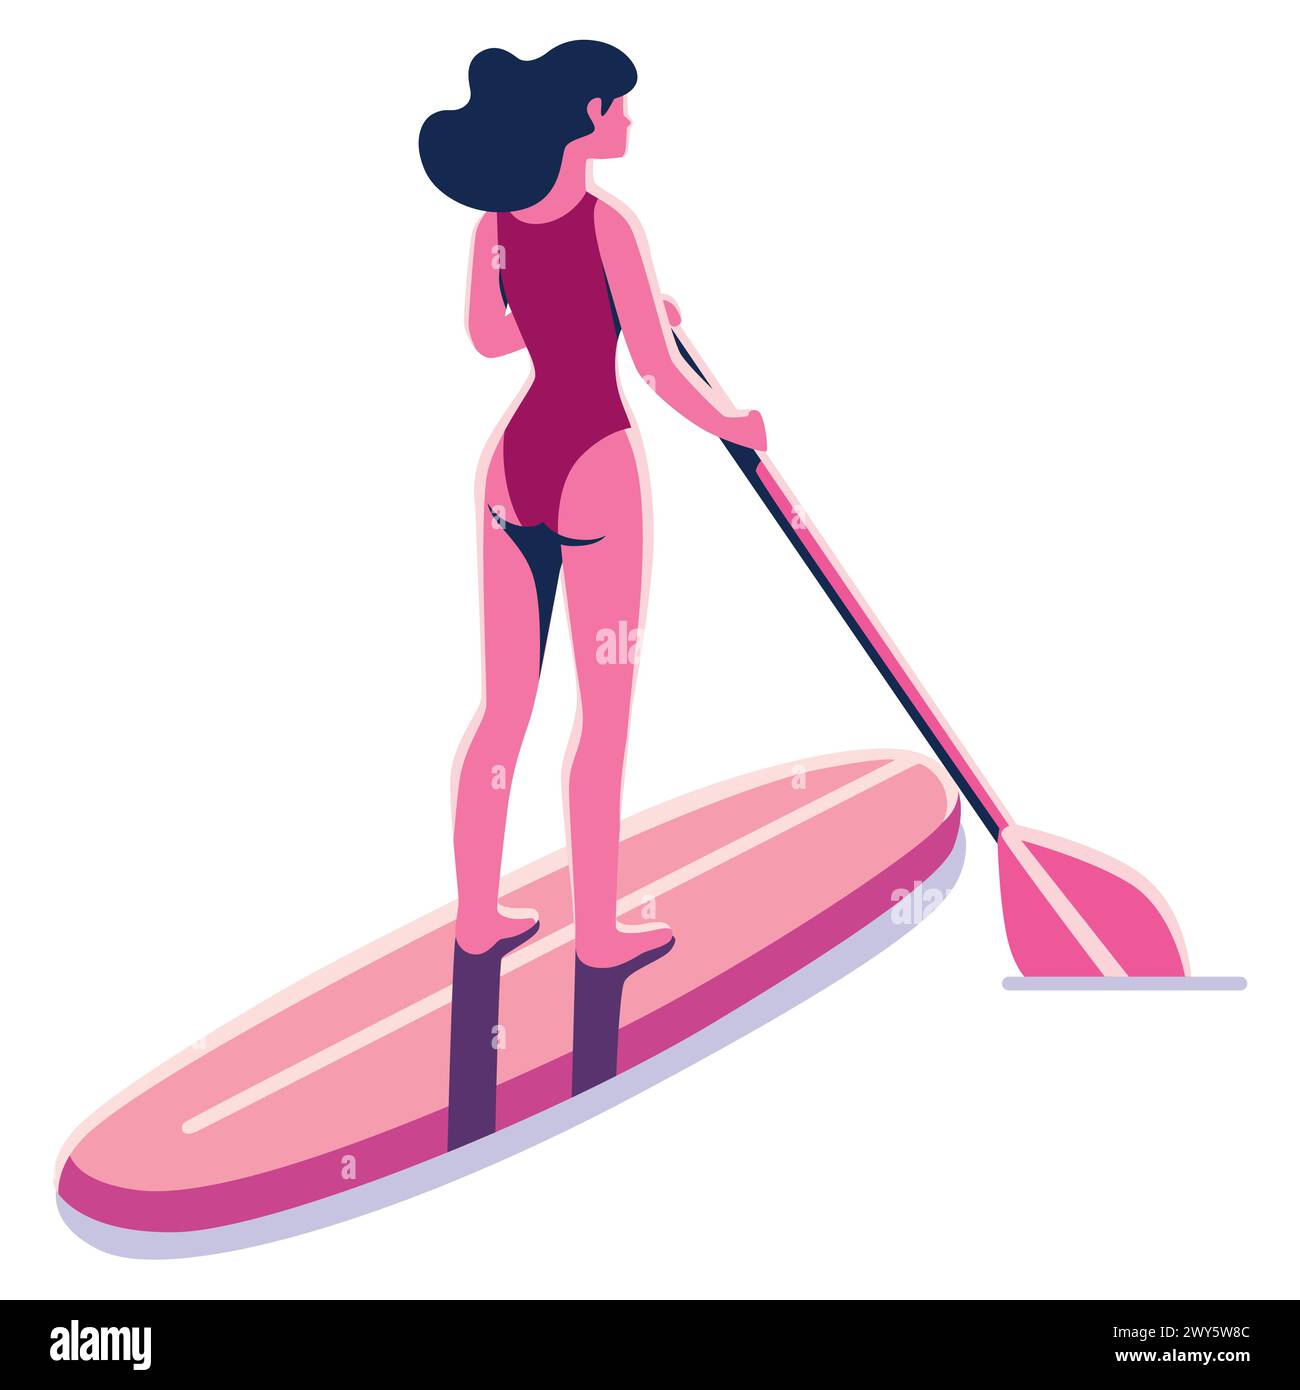 Flat design illustration of a woman paddleboarding, isolated on white background. Stock Vector